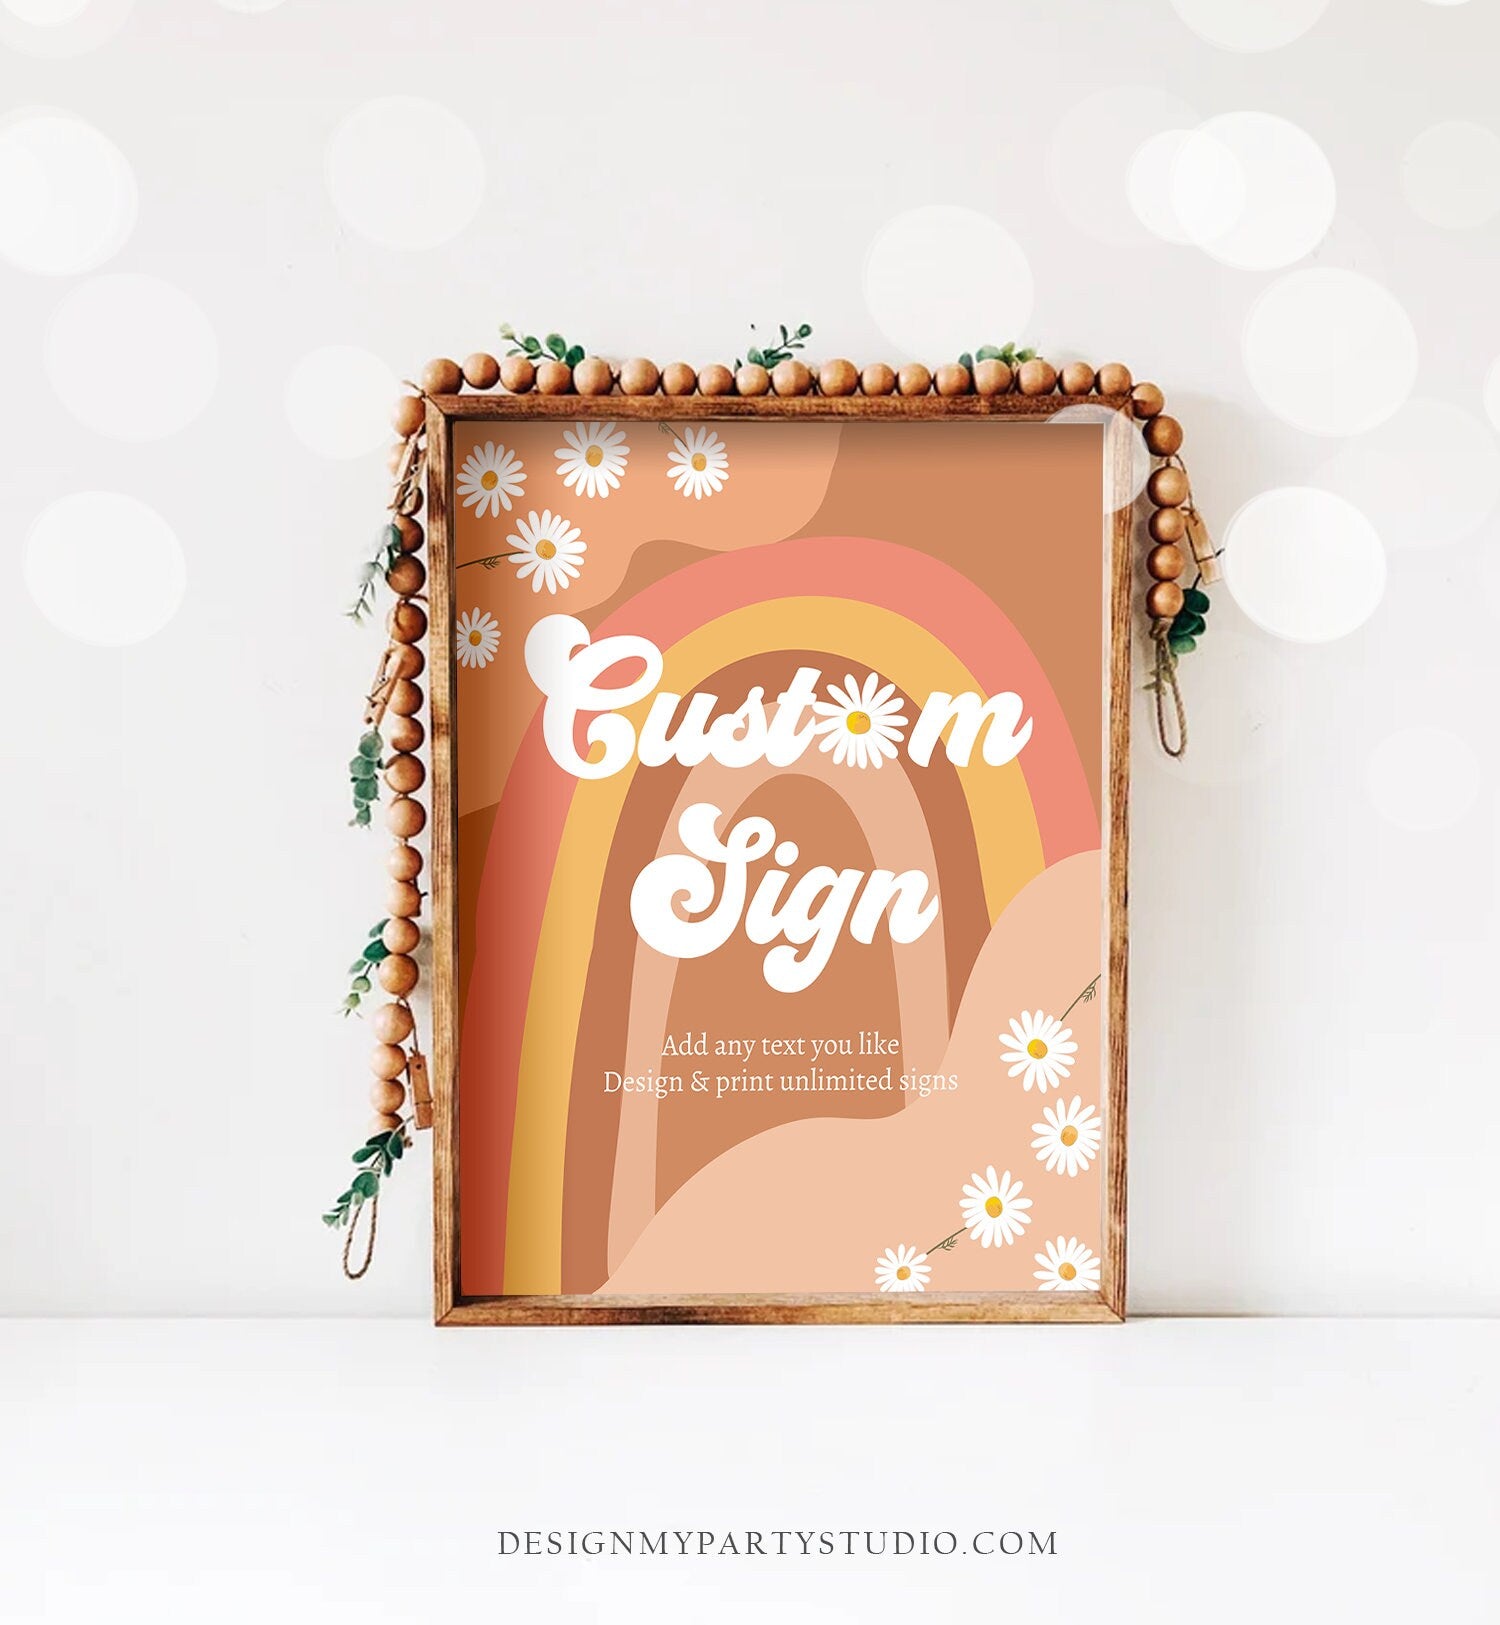 Editable Custom Sign Retro Groovy Birthday Party Groovy Baby Shower Decor Daisy Floral Hippie 70s Party 8x10 Download PRINTABLE Corjl 0428